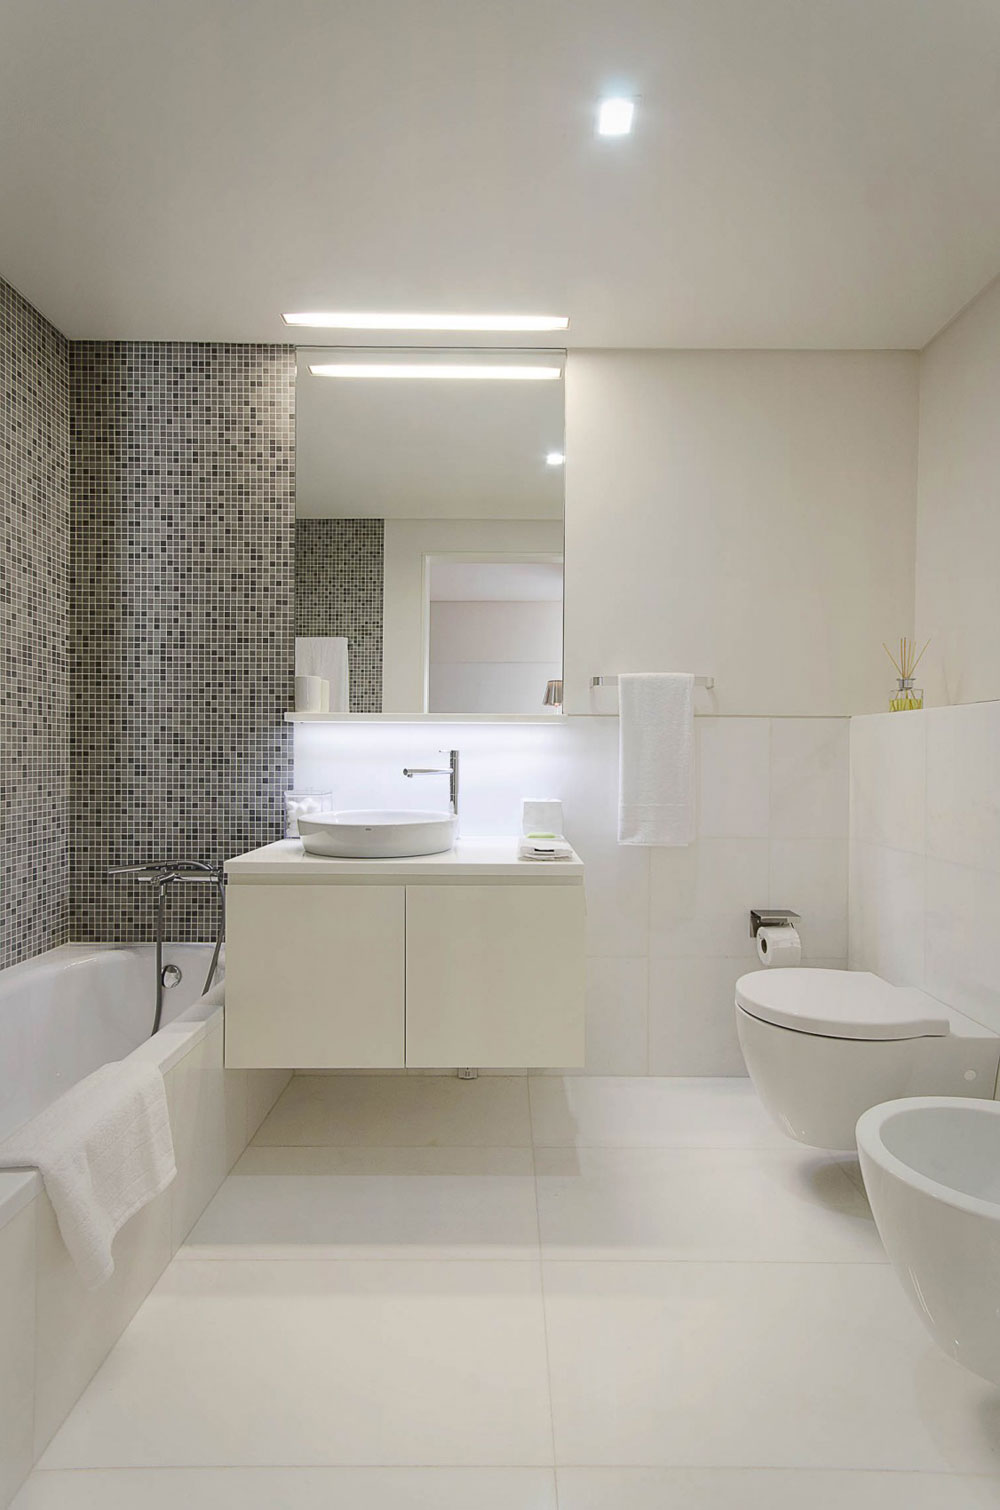 Looking for inspiration for modern bathroom interiors-14 Looking for inspiration for modern bathroom interiors?